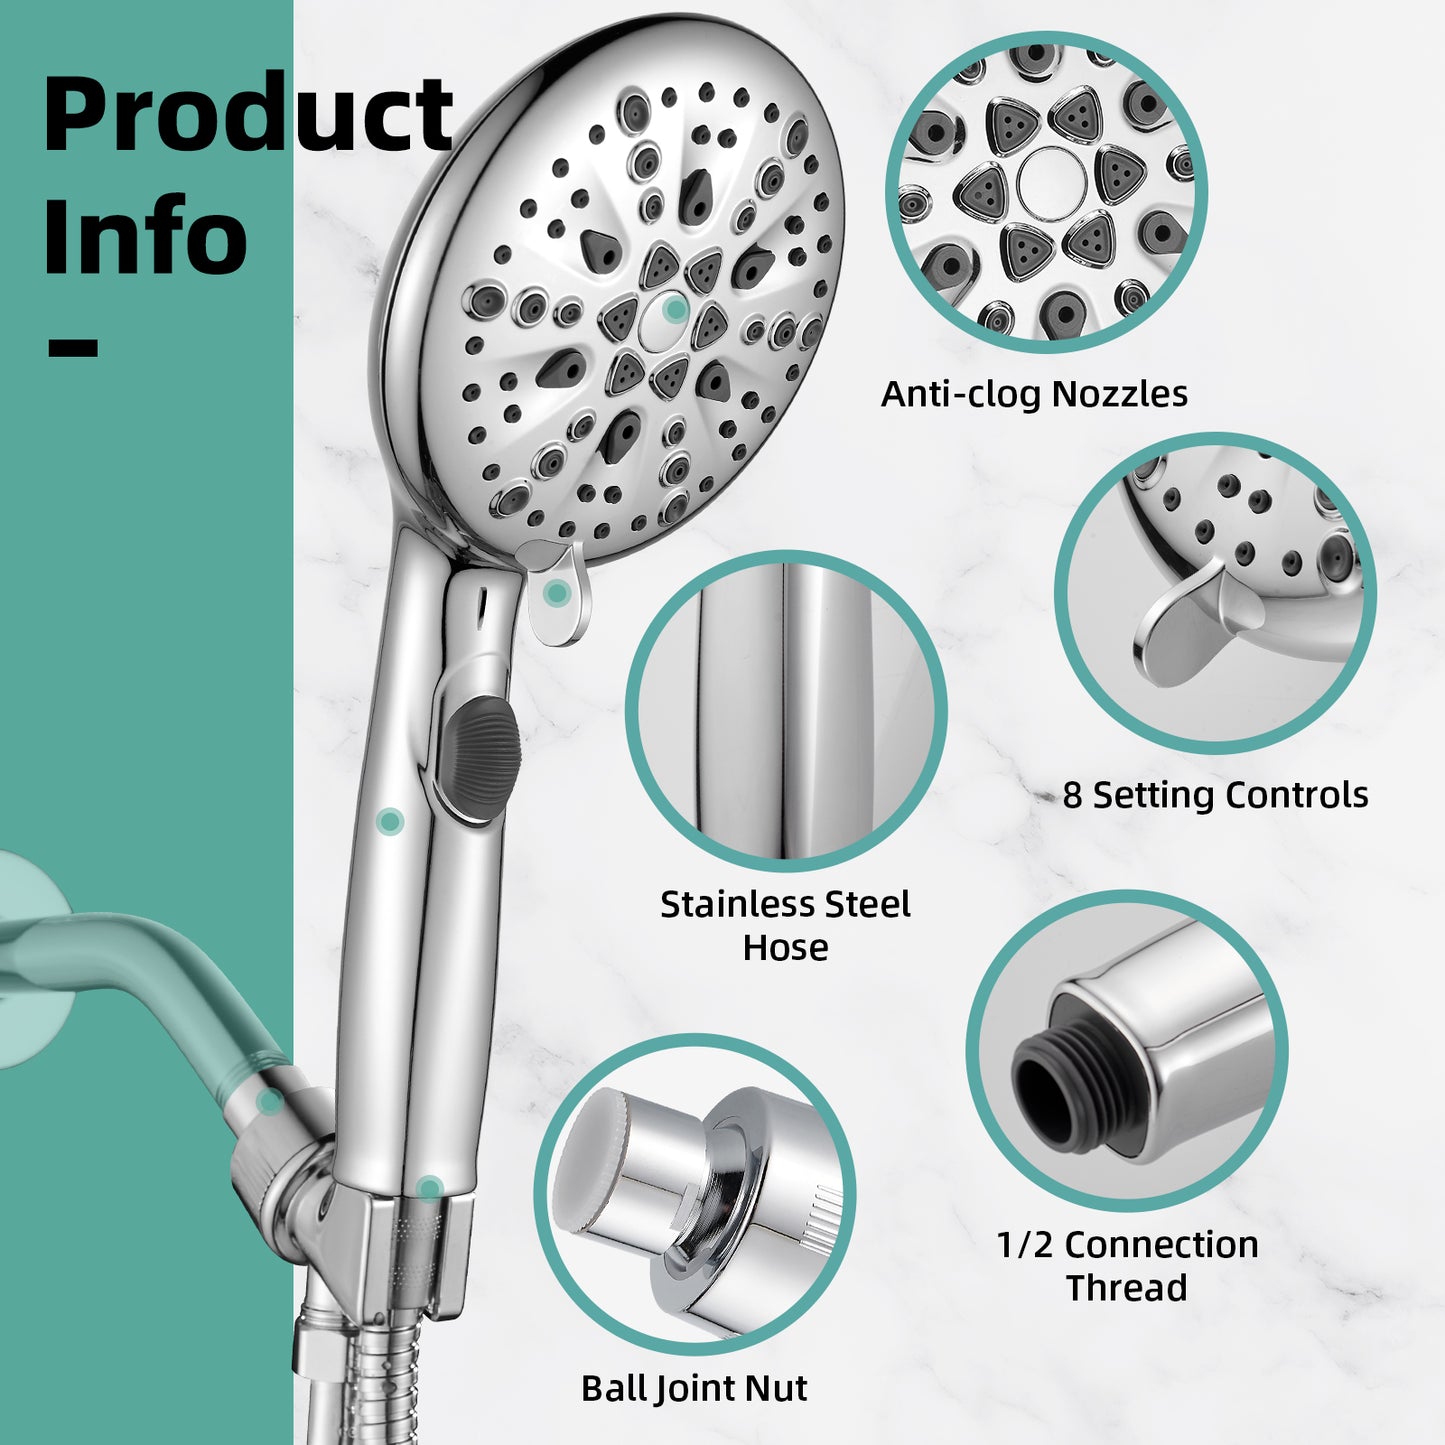 Cobbe High Pressure 9 Functions Shower Head with handheld, Built-in Power Spray to Clean Corner, Tub and Pets, Stainless Steel Hose Adjustable Bracket